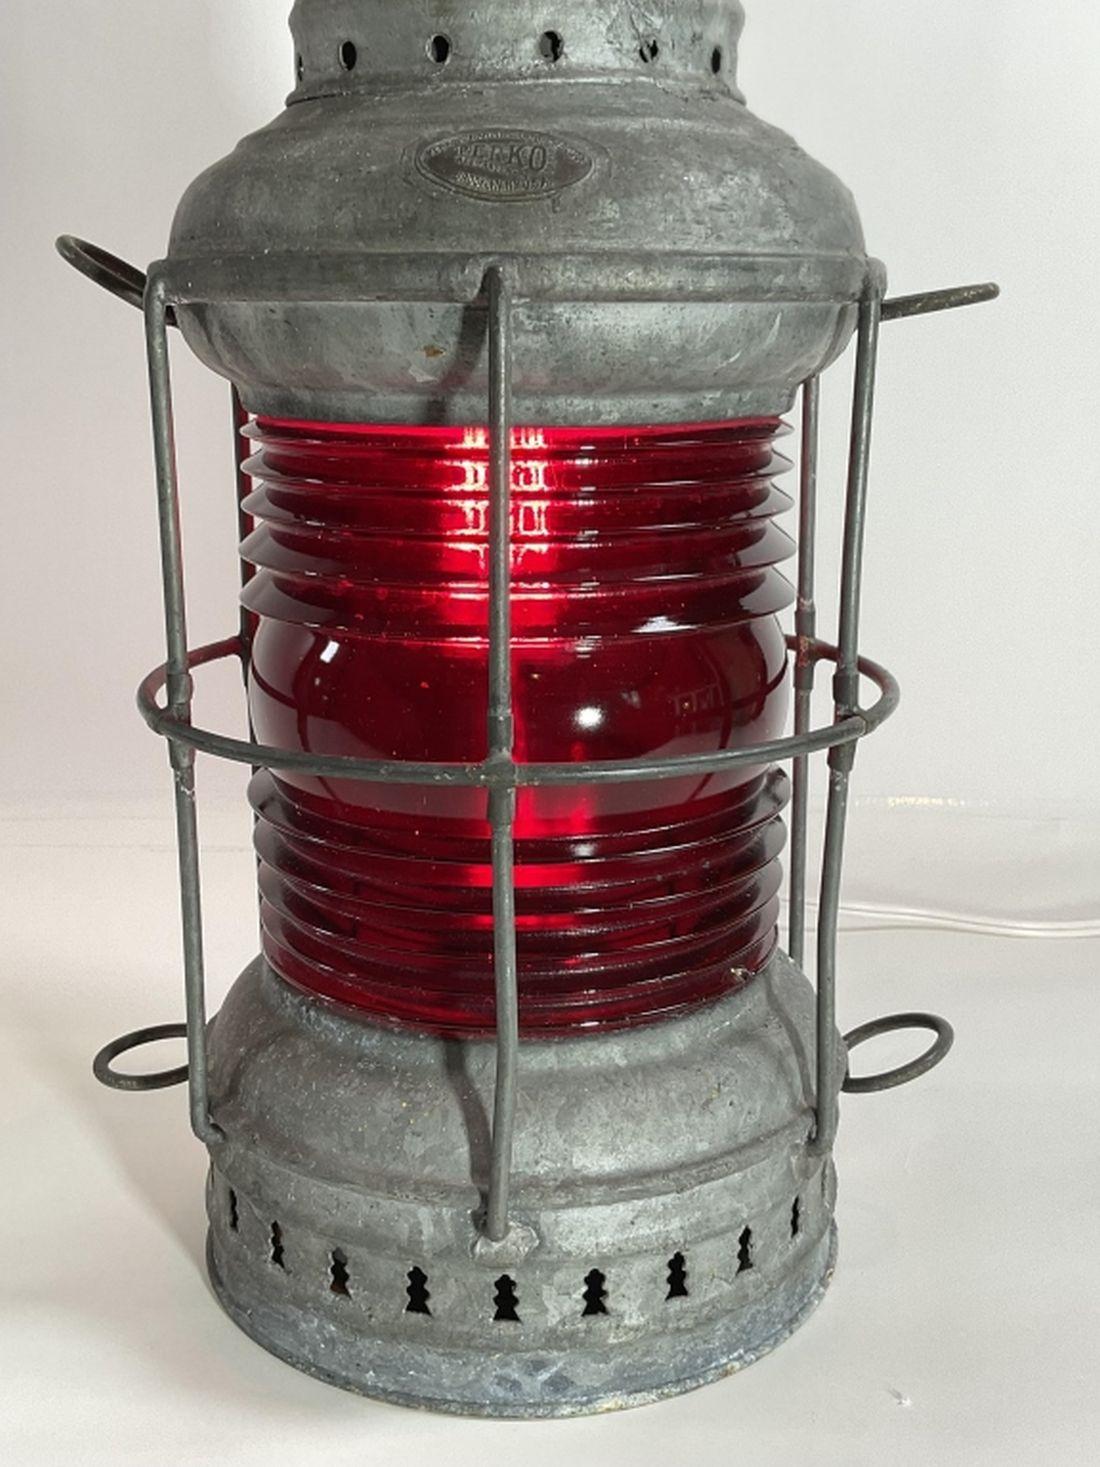 Ships Lantern with Ruby Lens by Perko - Lannan Gallery